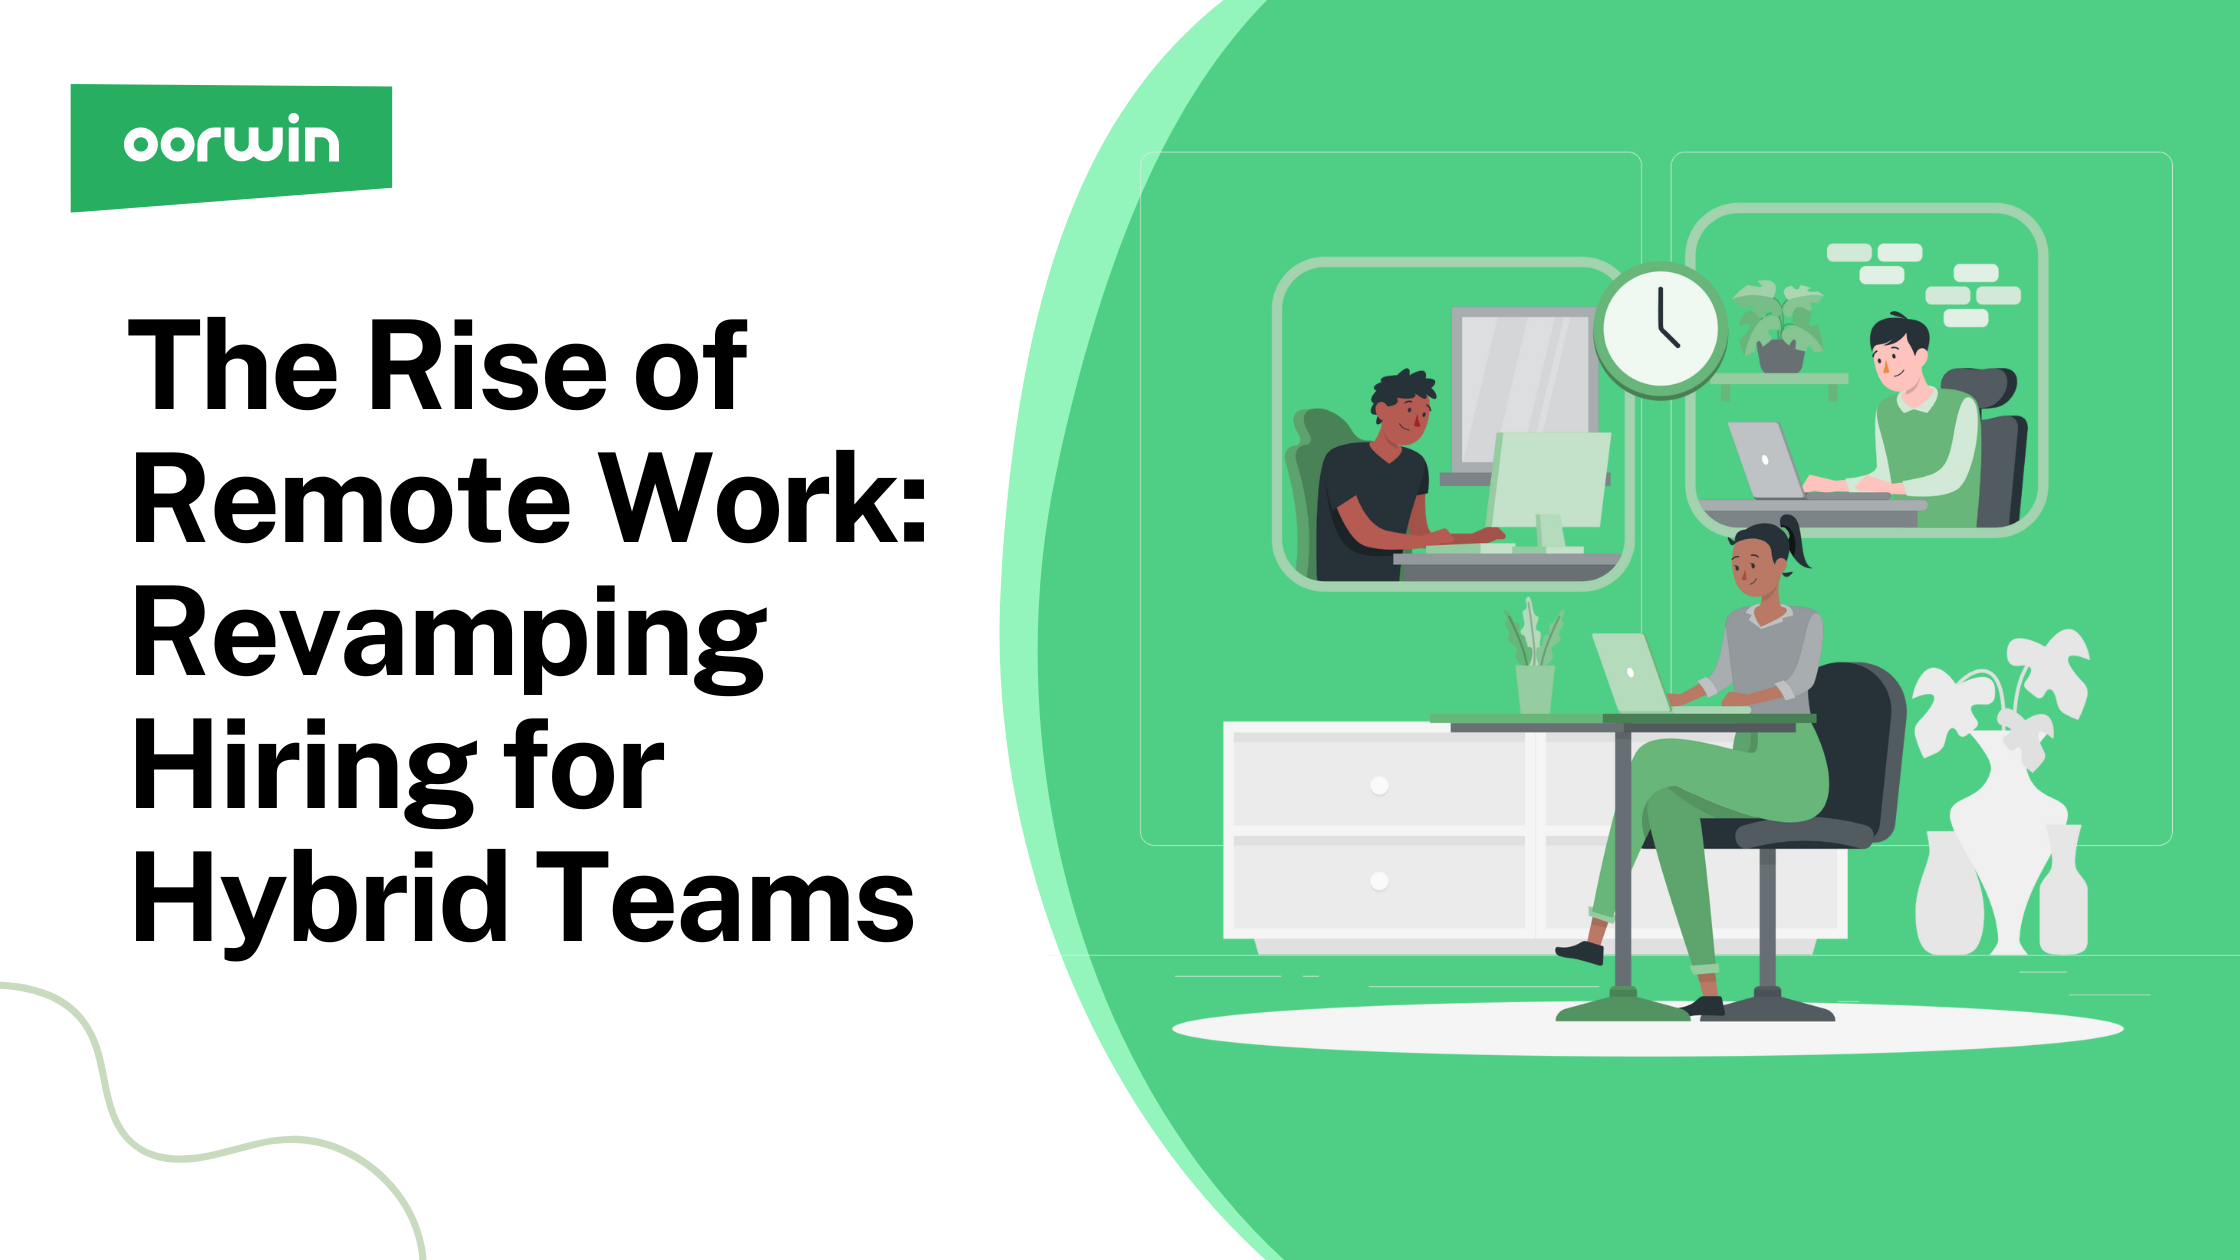 The Rise of Remote Work: Revamping Hiring for Hybrid Teams